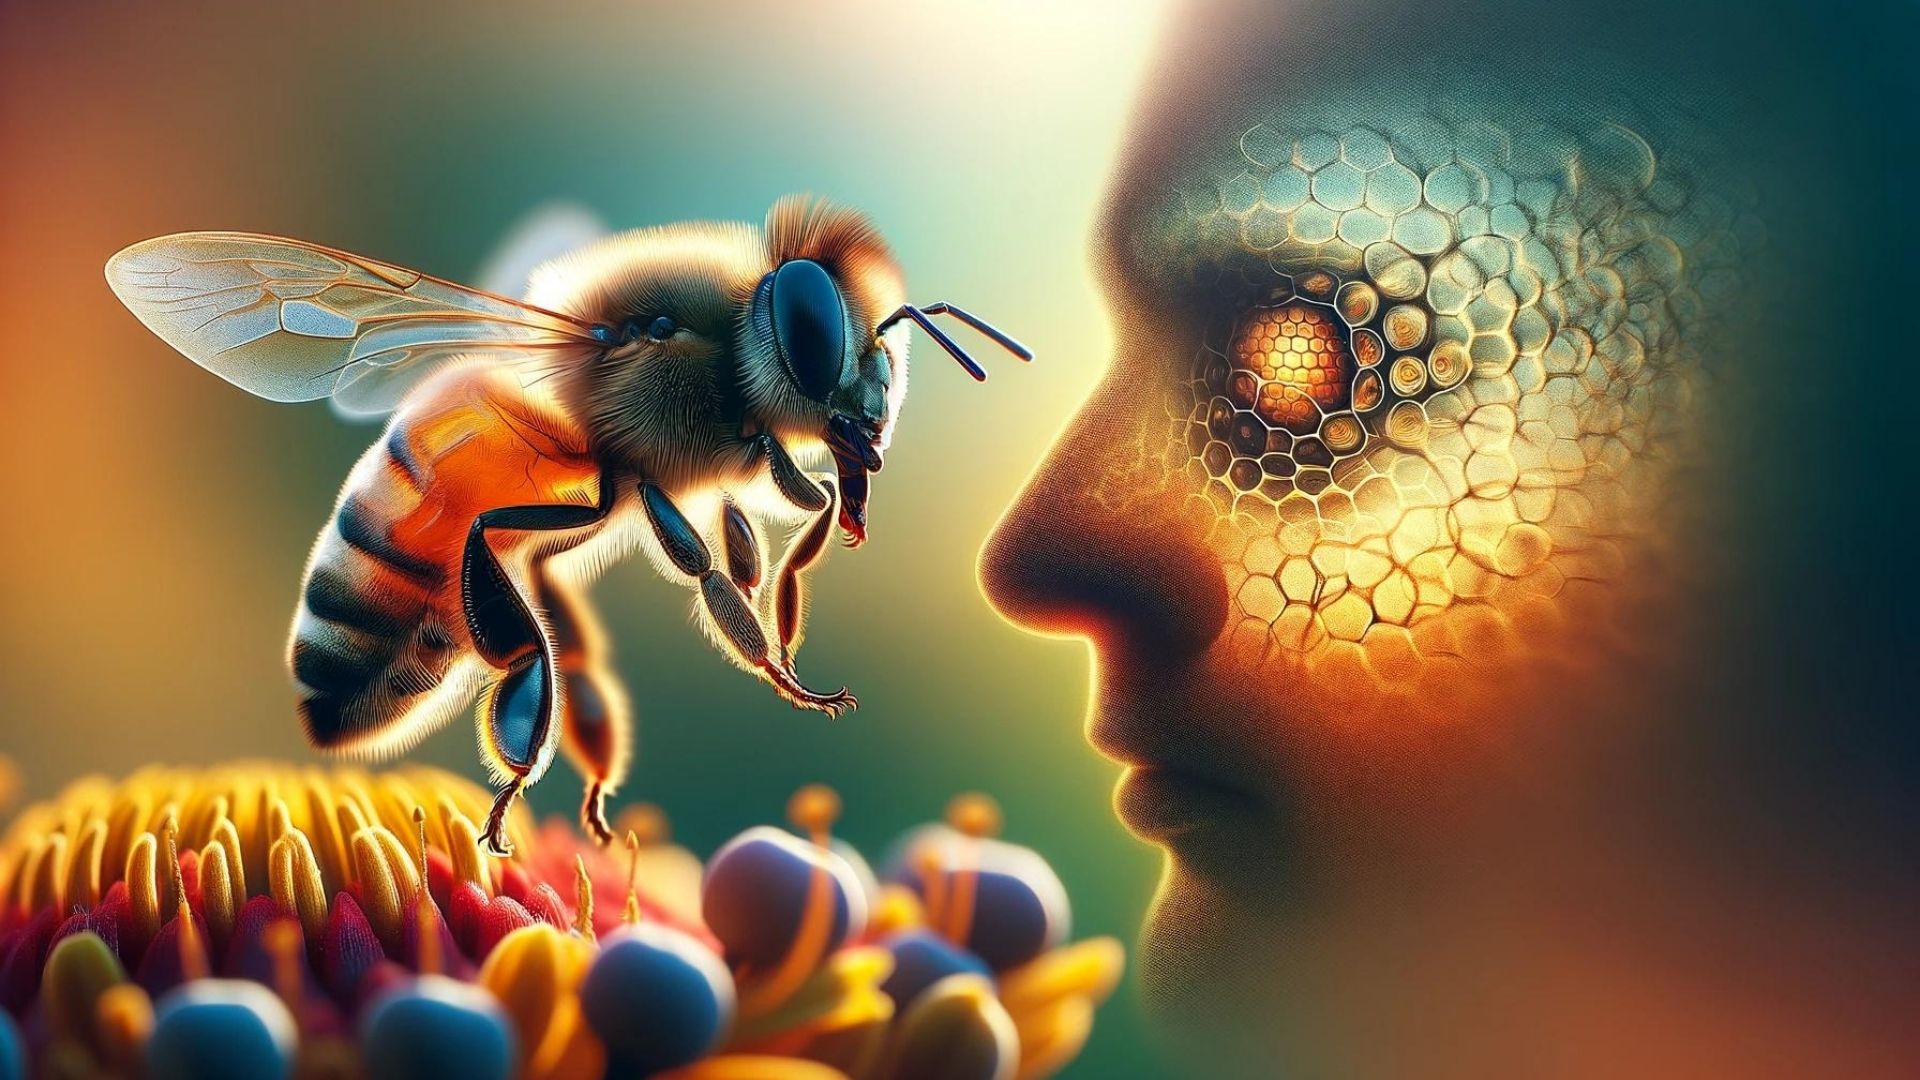 Honeybees can recognize human faces